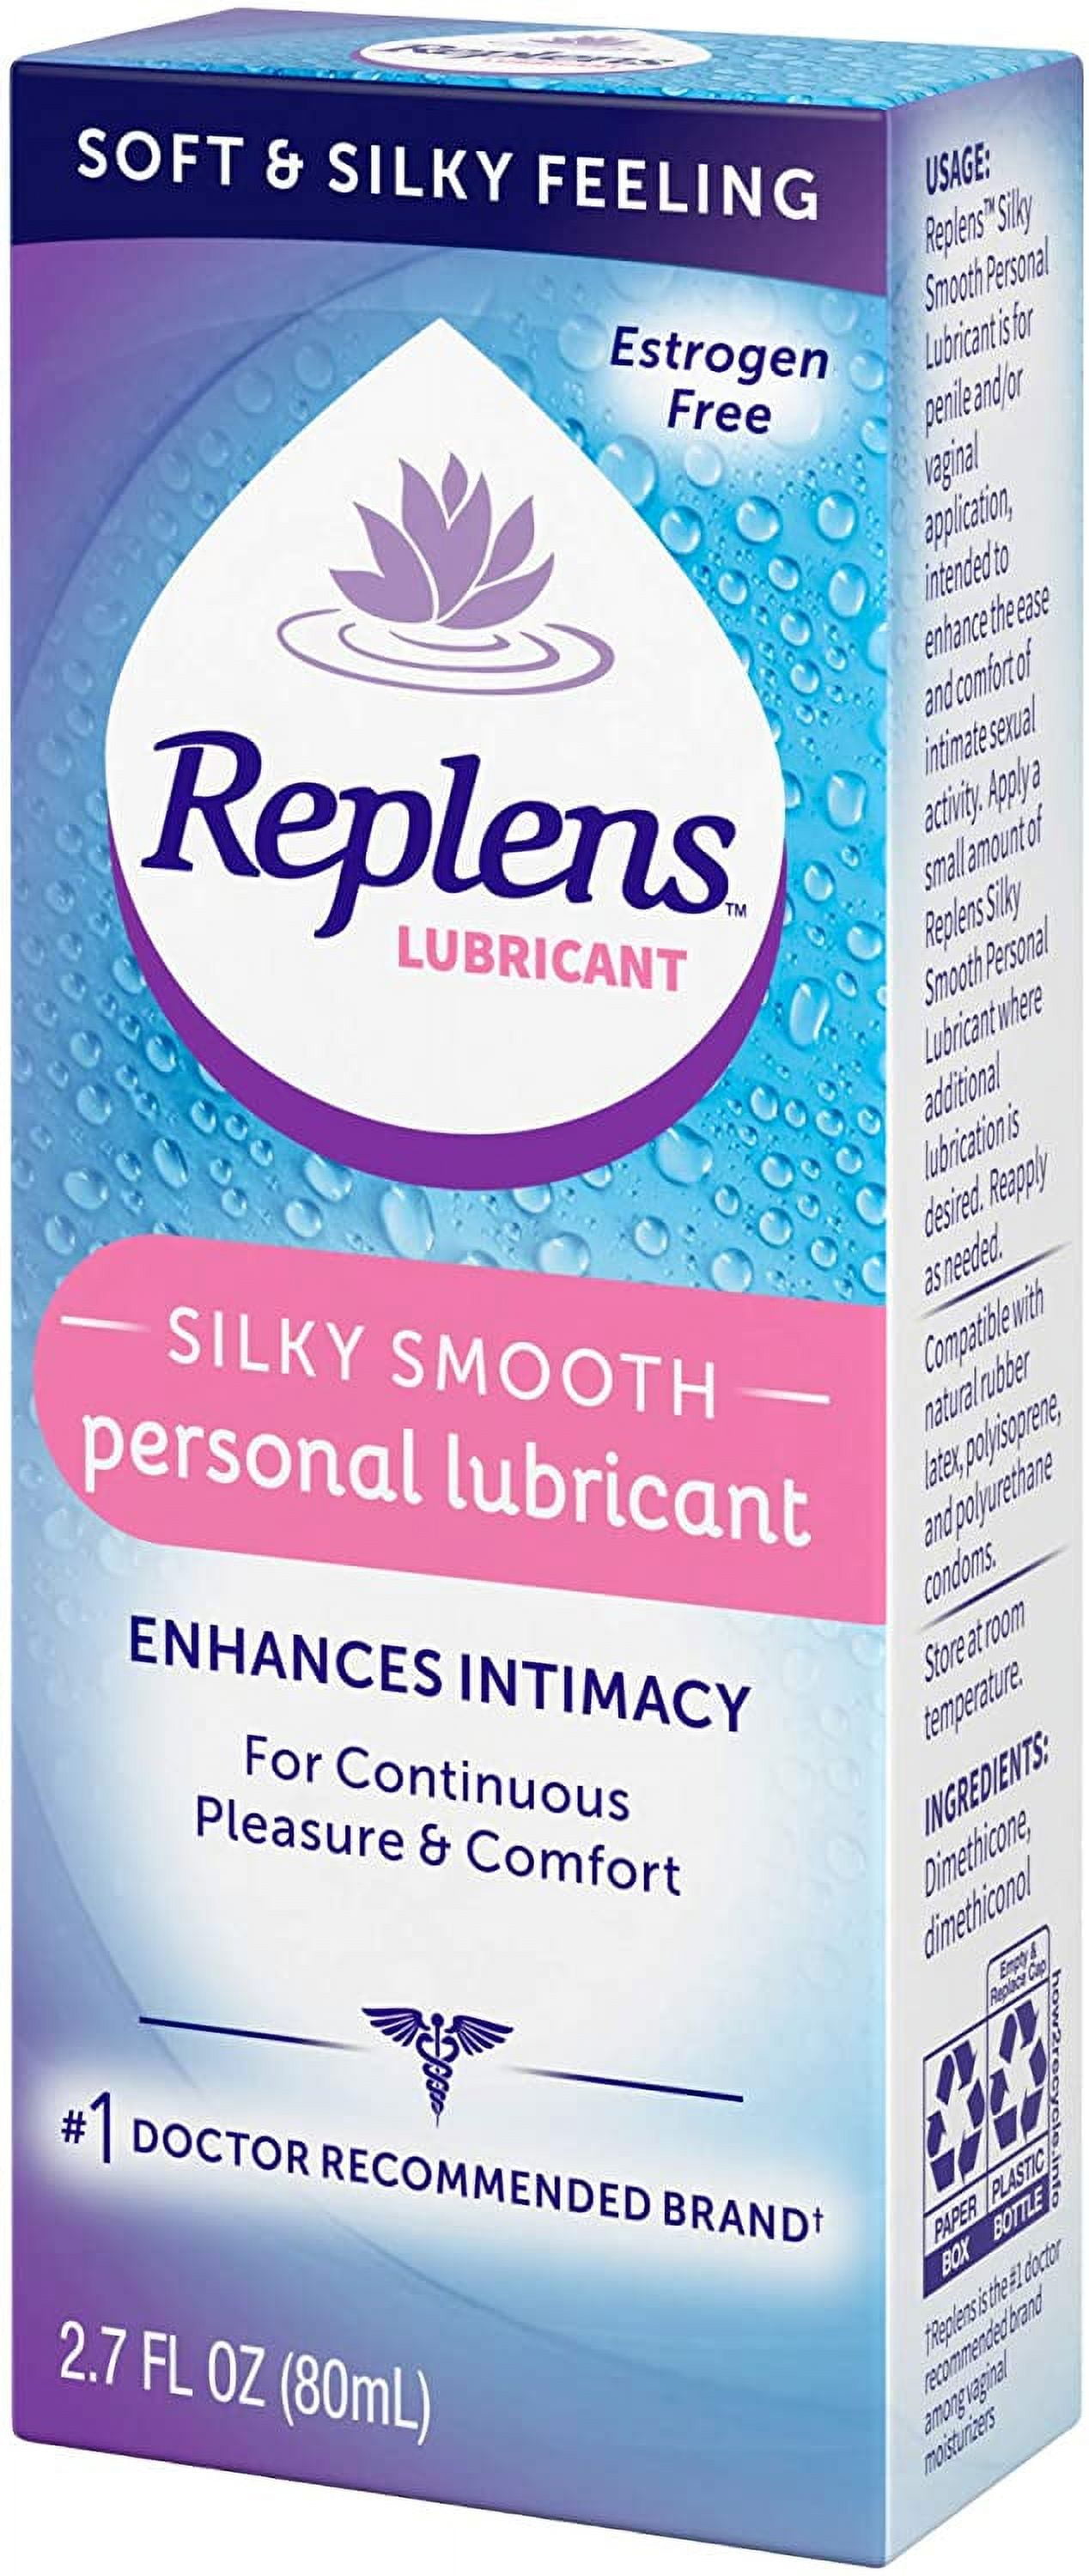 6 Pack - Replens Silky Smooth Personal Lubricant 2.7 oz (80 mL) Each